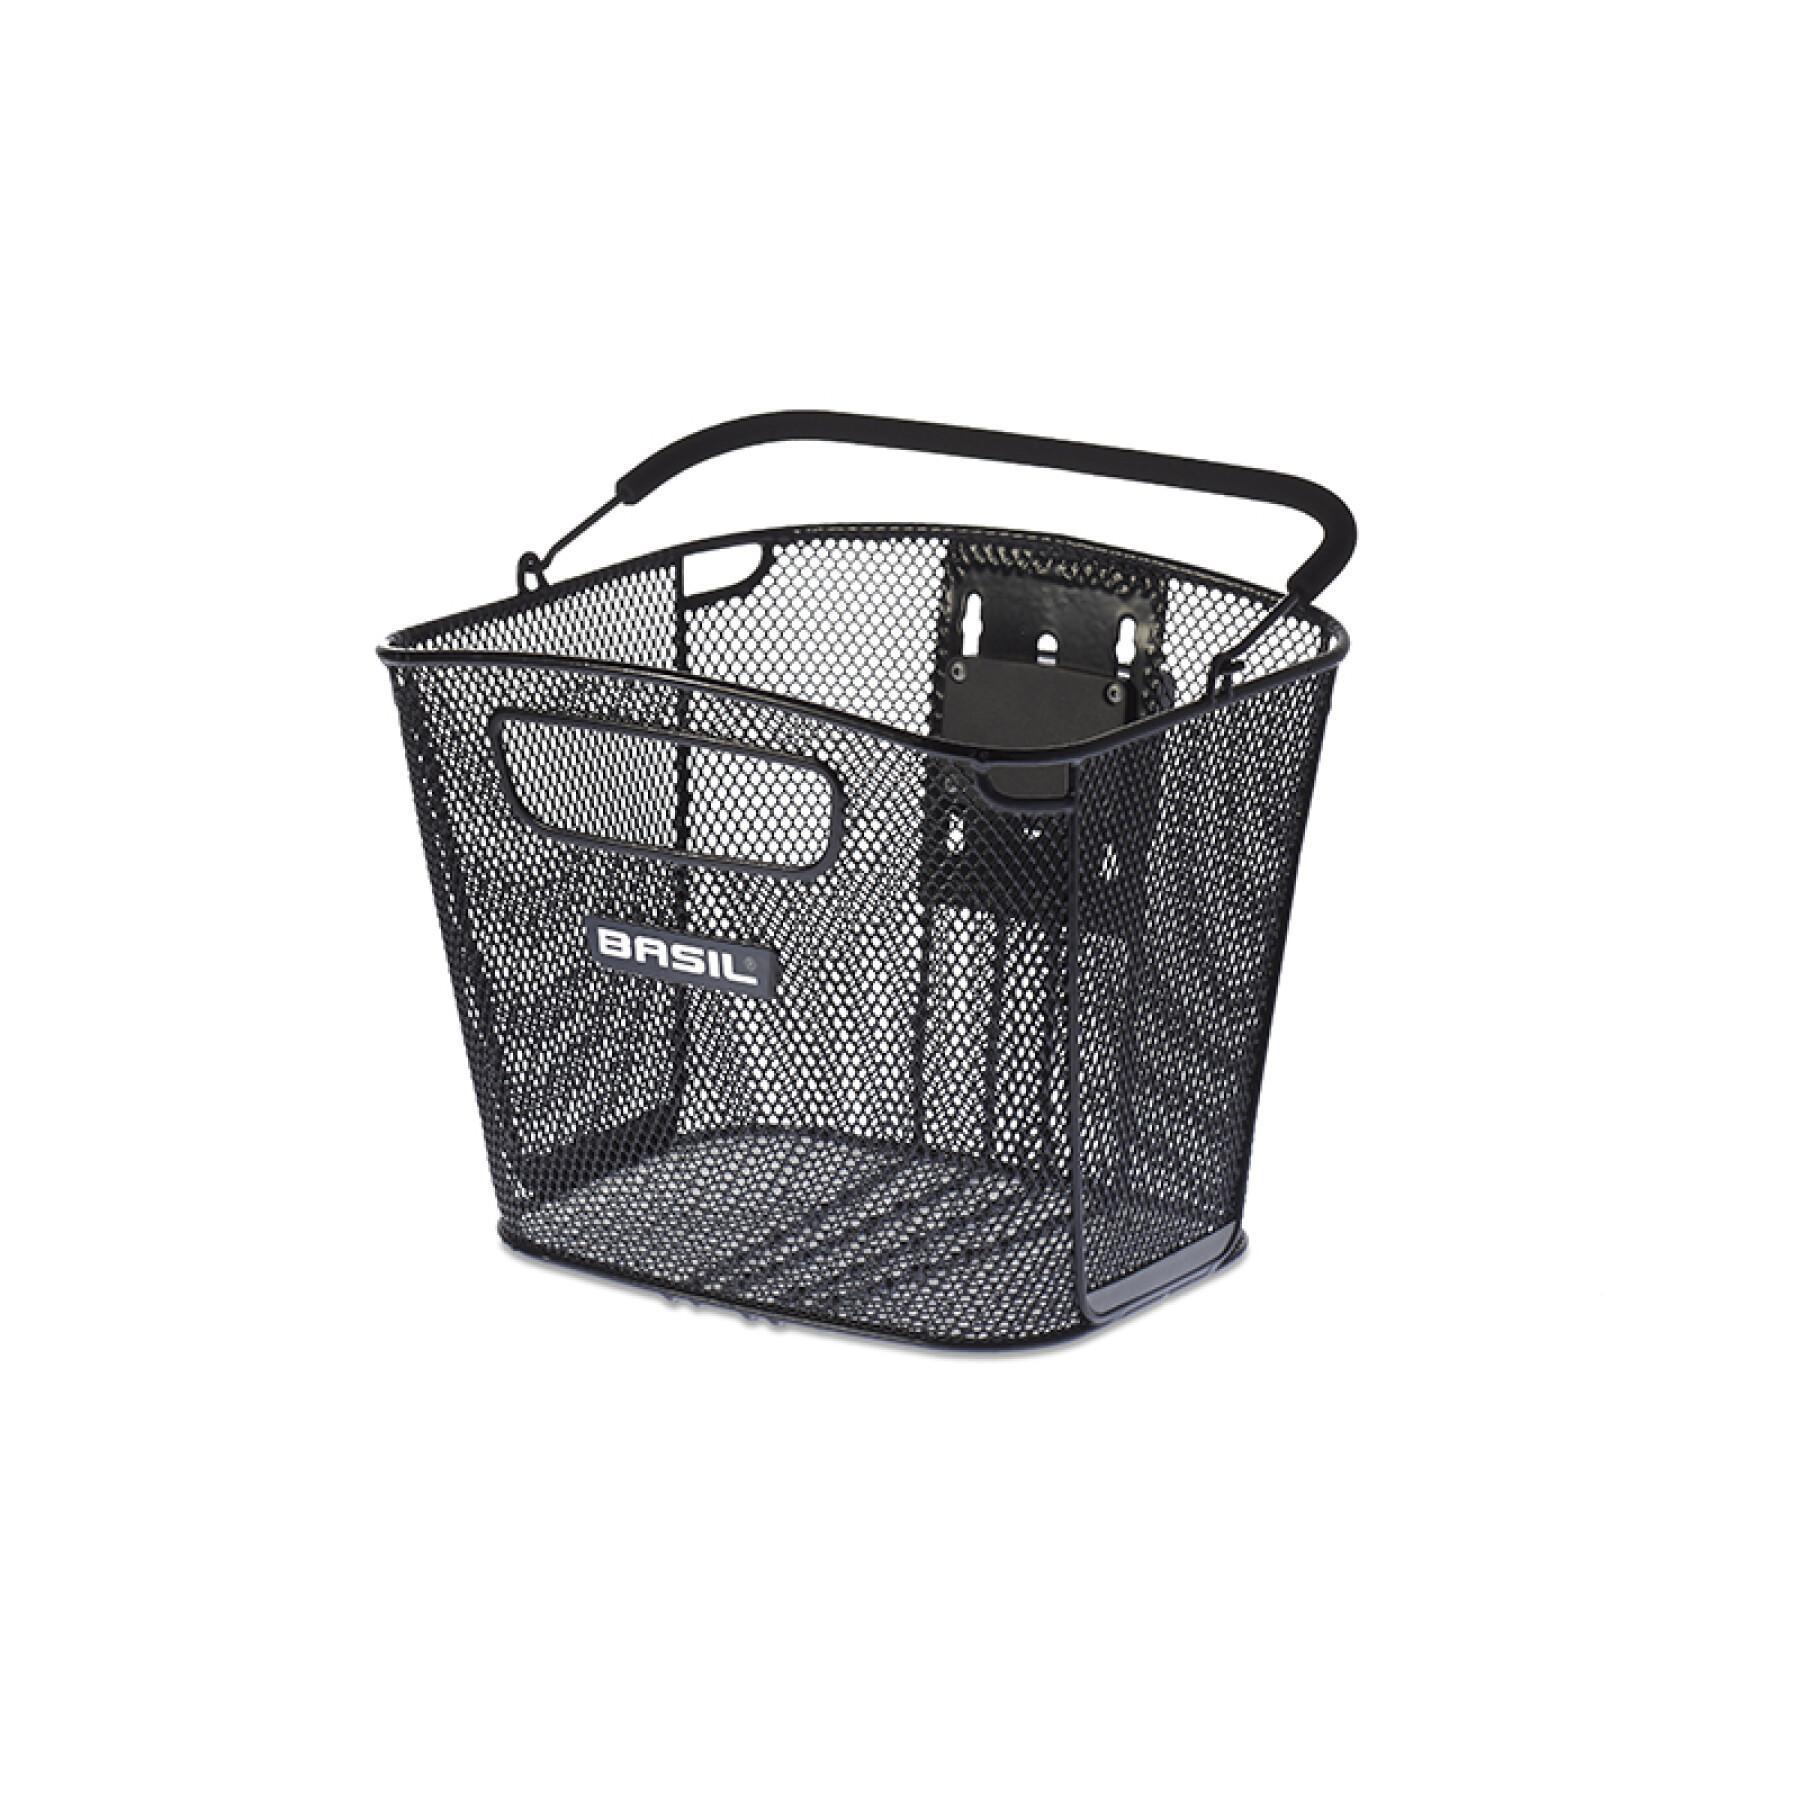 Bicycle basket with handle + adapter kf steel front Basil Bold - Luggage -  Equipments